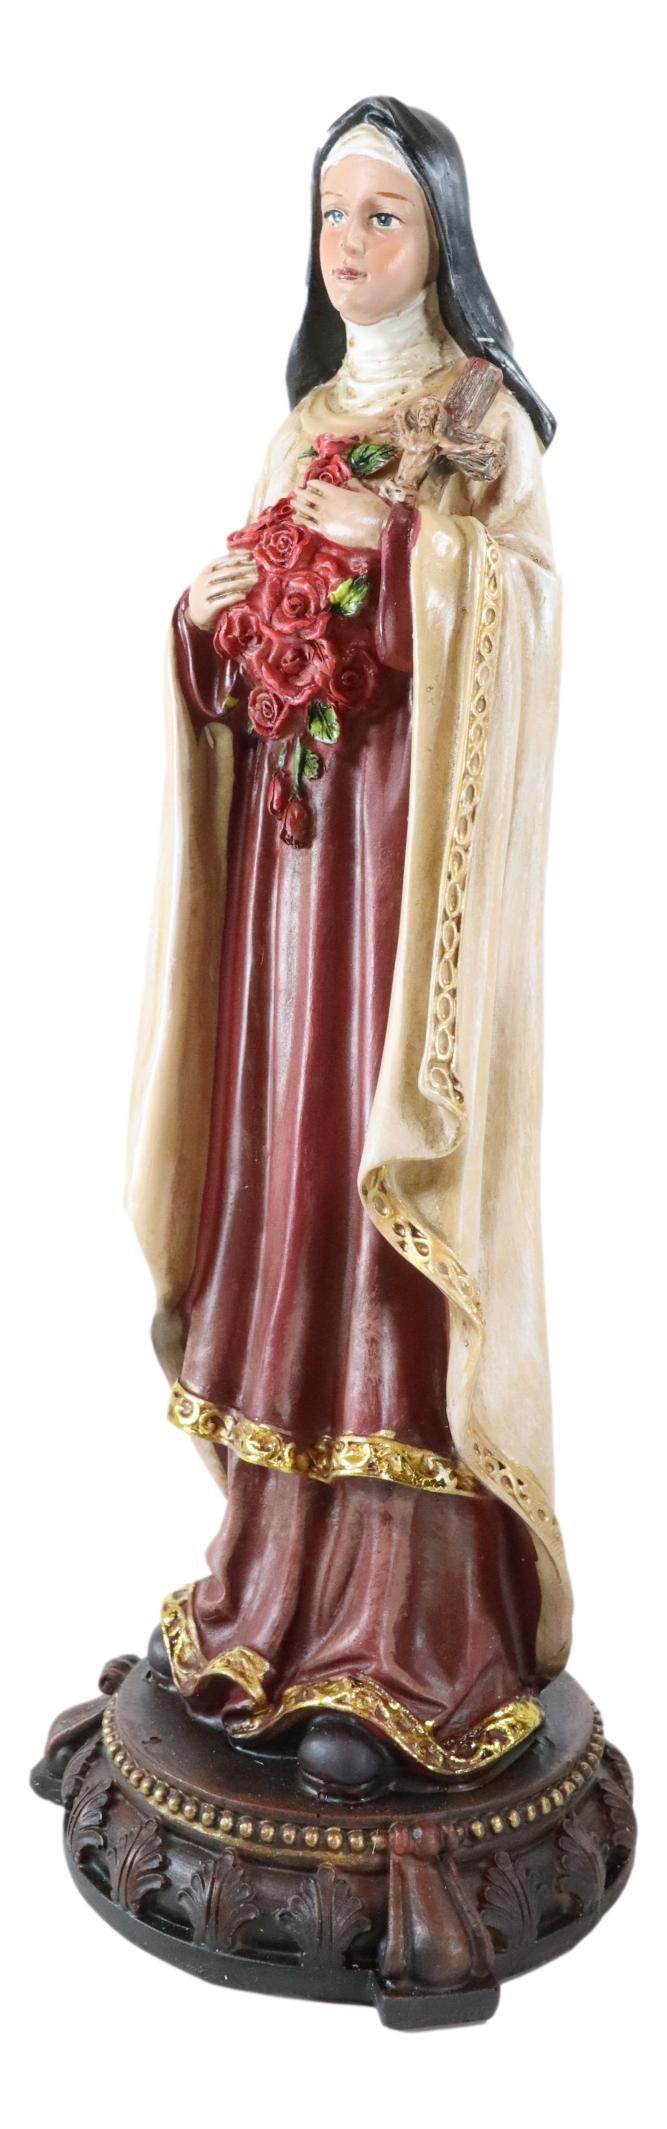 Catholic Saint Therese of Lisieux W/ Cross And Red Roses Little Flower Figurine